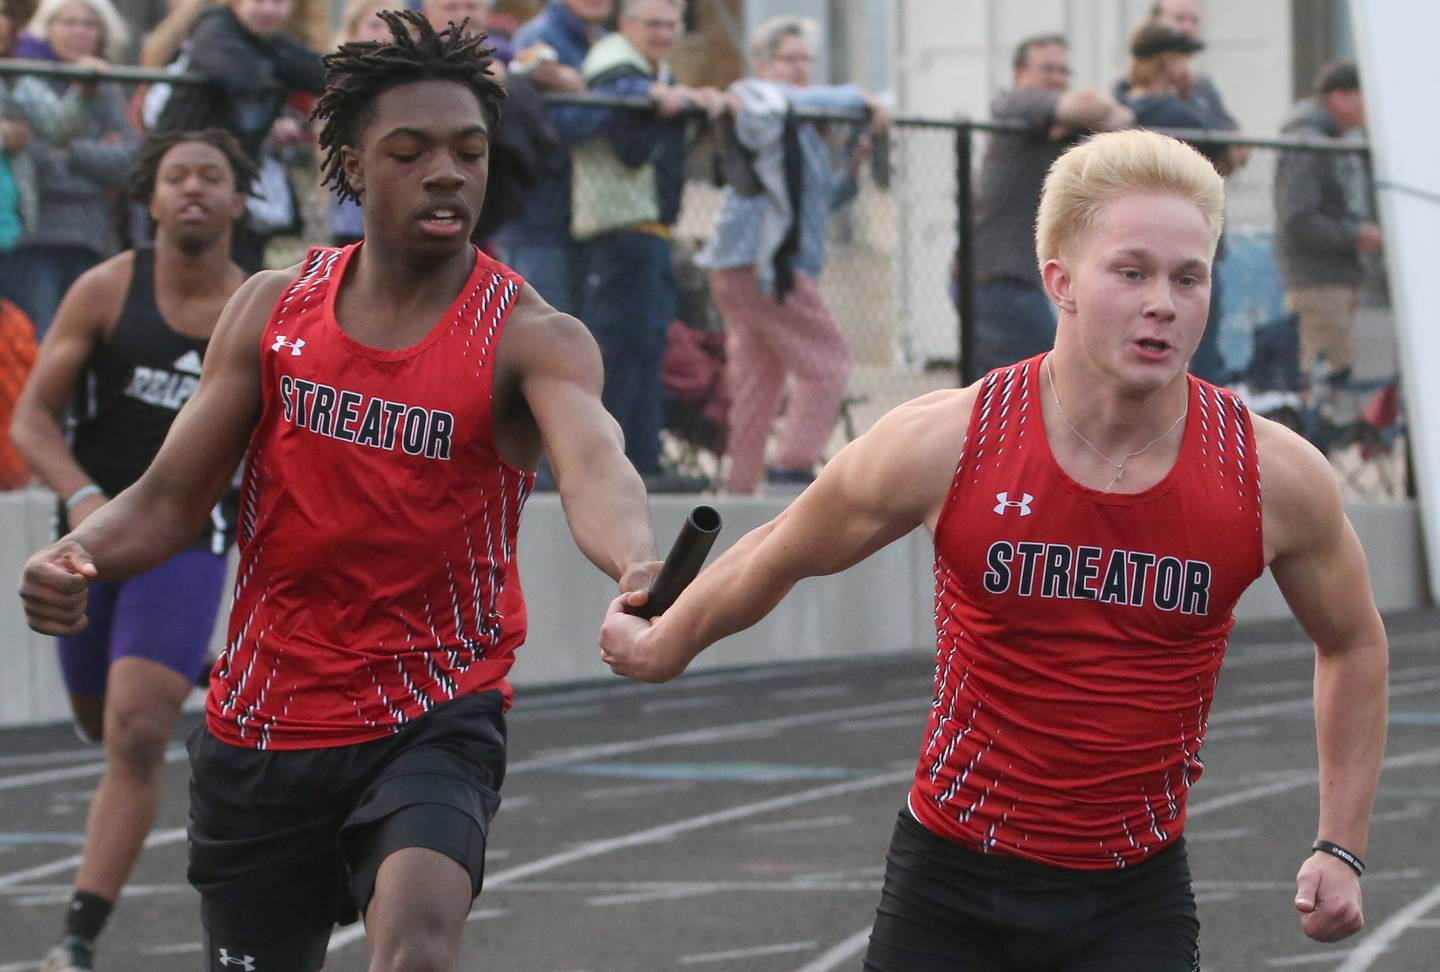 Streator's Collin Jeffries takes the baton from teammate Isaiah Brown in the 4x200 meter relay during the Class 2A track sectional meet last season at Geneseo High School.